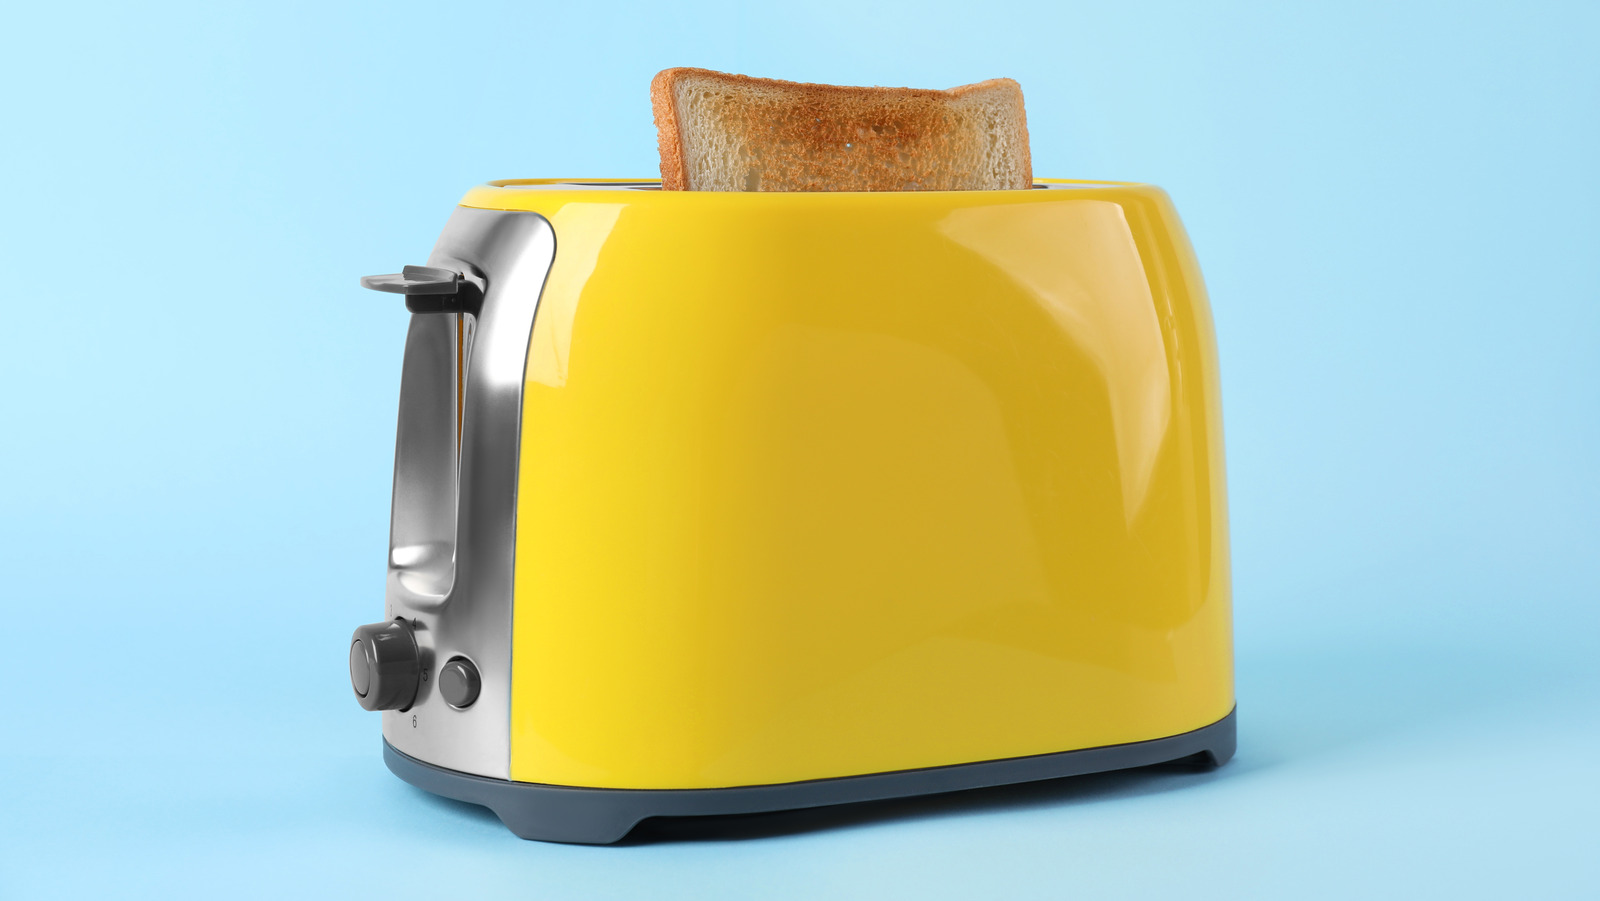 Mueller Retro Toaster 2 Slice, Extra Wide Slots, Stainless Steel